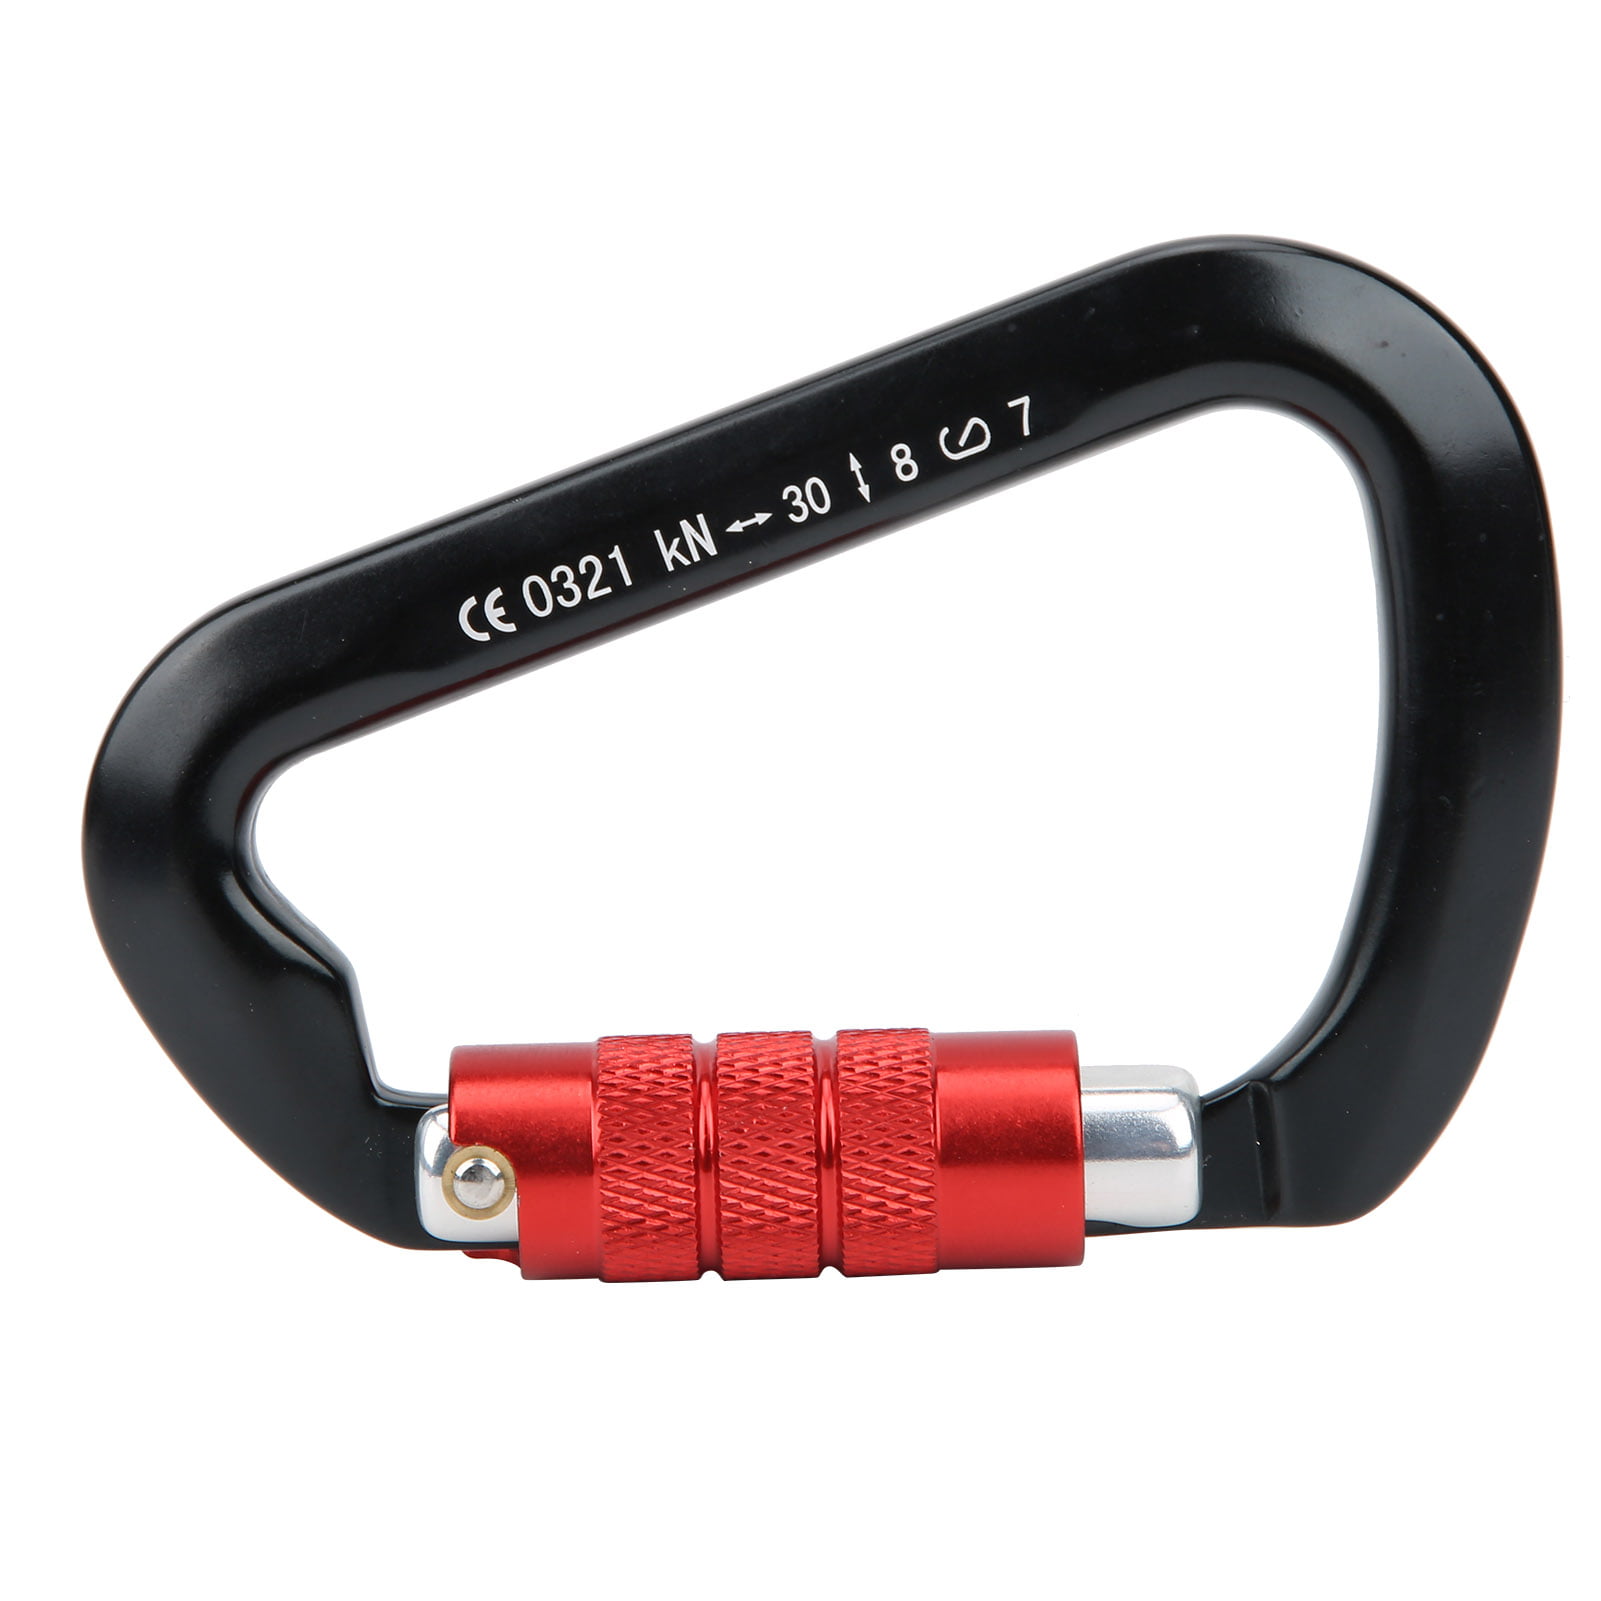 Black Aviation Auto Lock D‑Shape Carabiner Safe For Outdoor Climbing Camping 